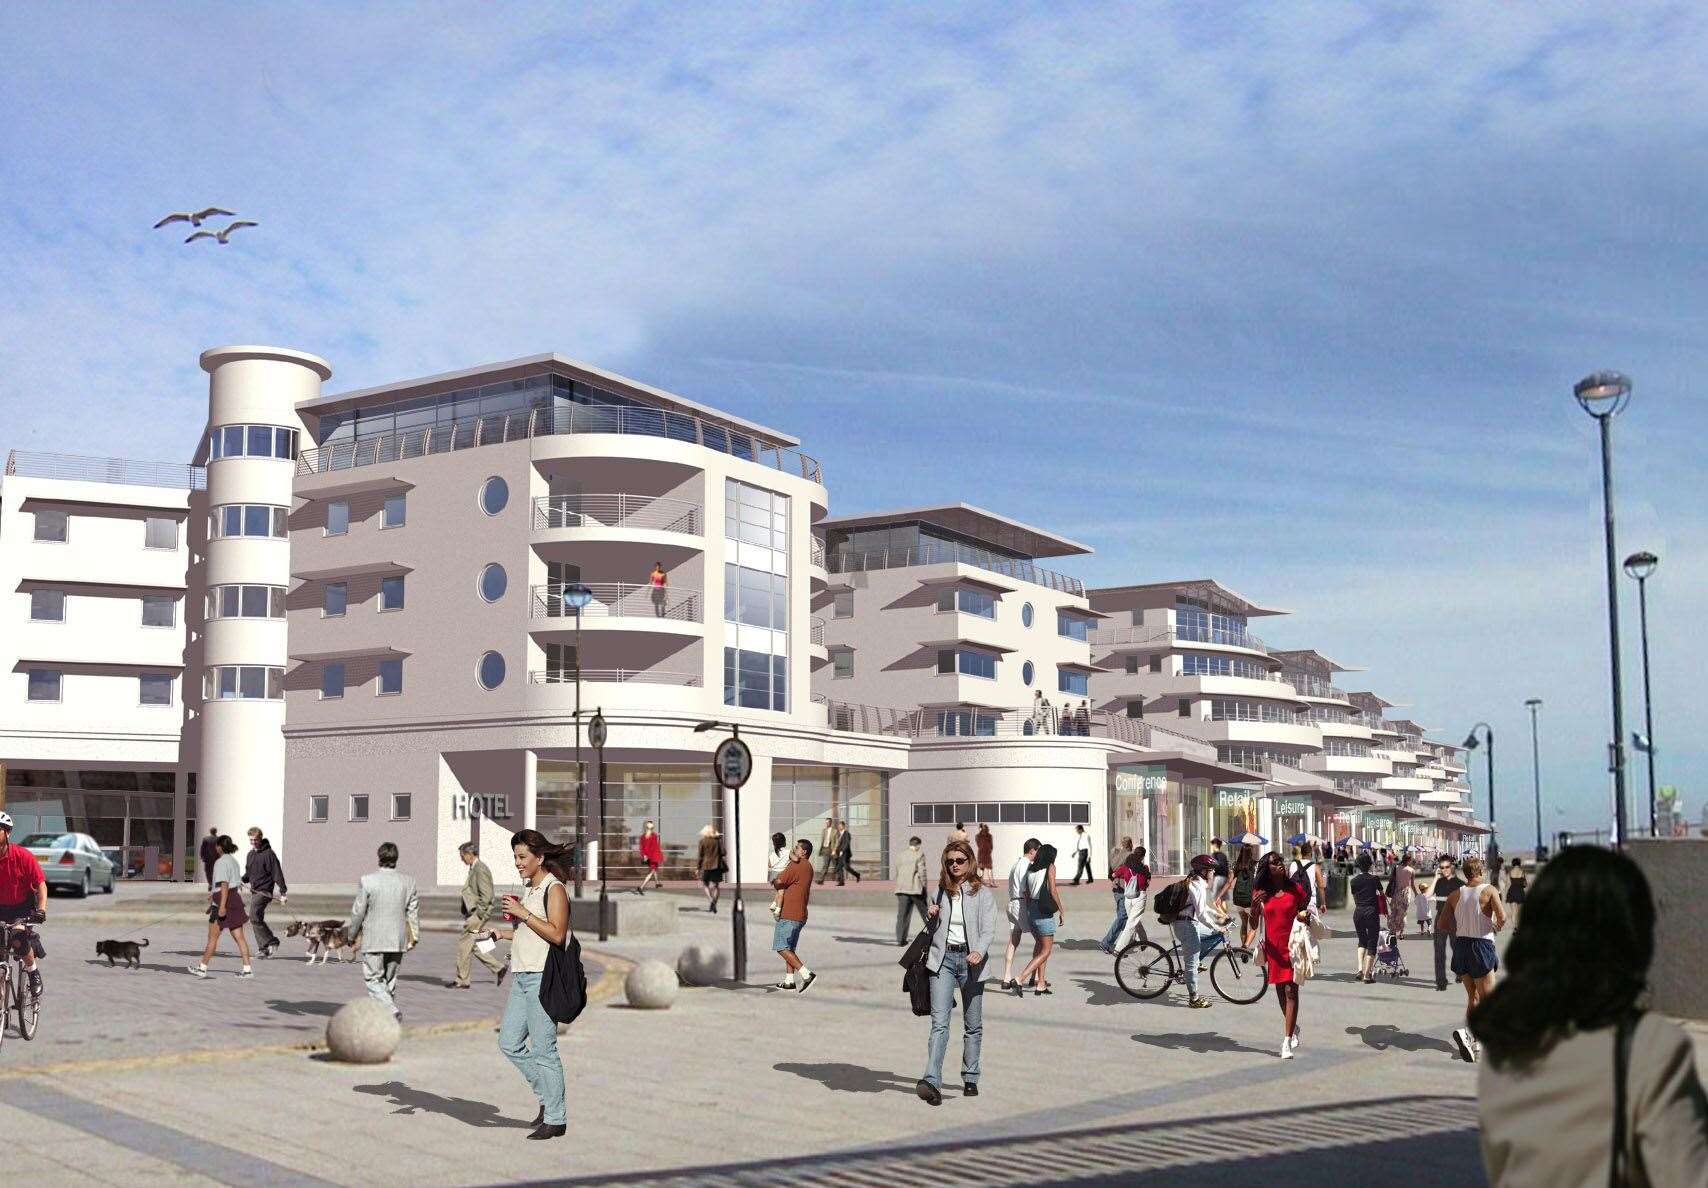 The Royal Sands development artist's impression - to be built on the Pleasurama site in Ramsgate